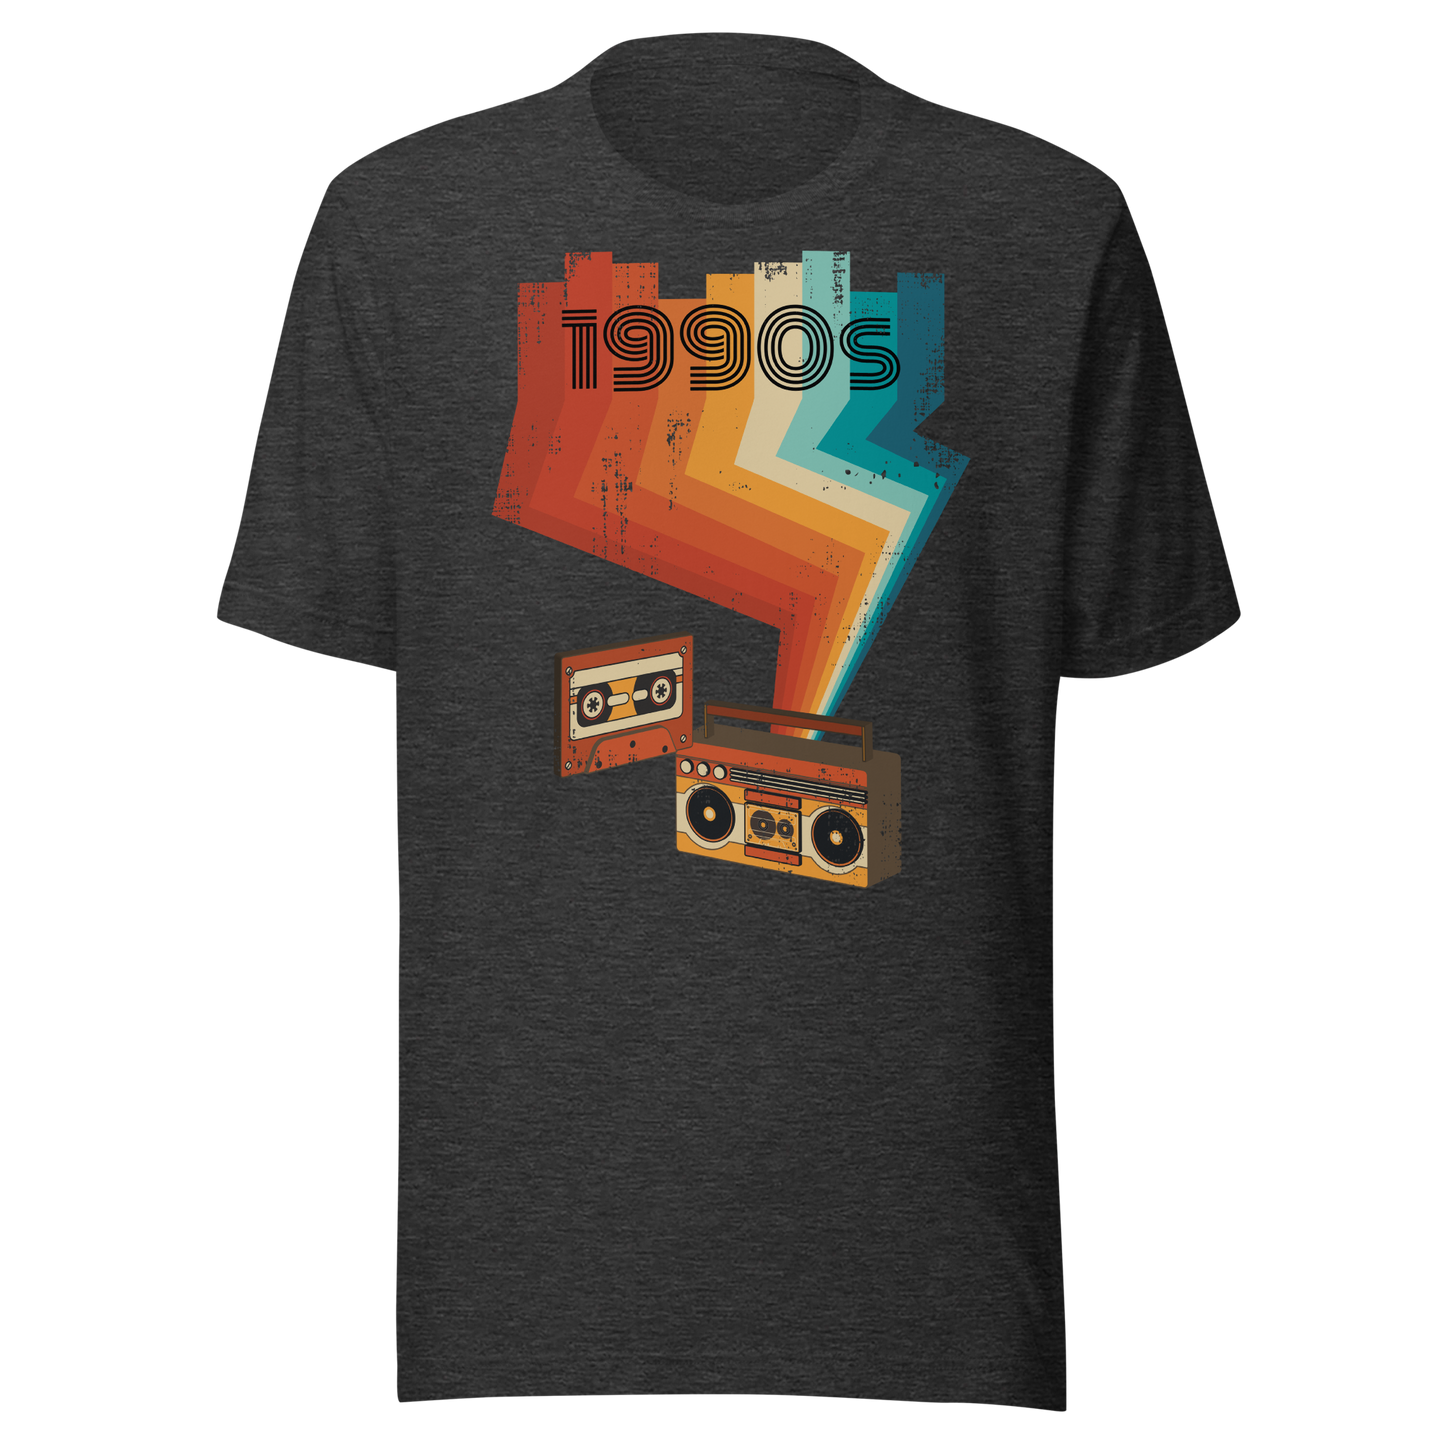 Retro Unisex T-Shirt - Cassette Player and Colorful Rays Ghost Front